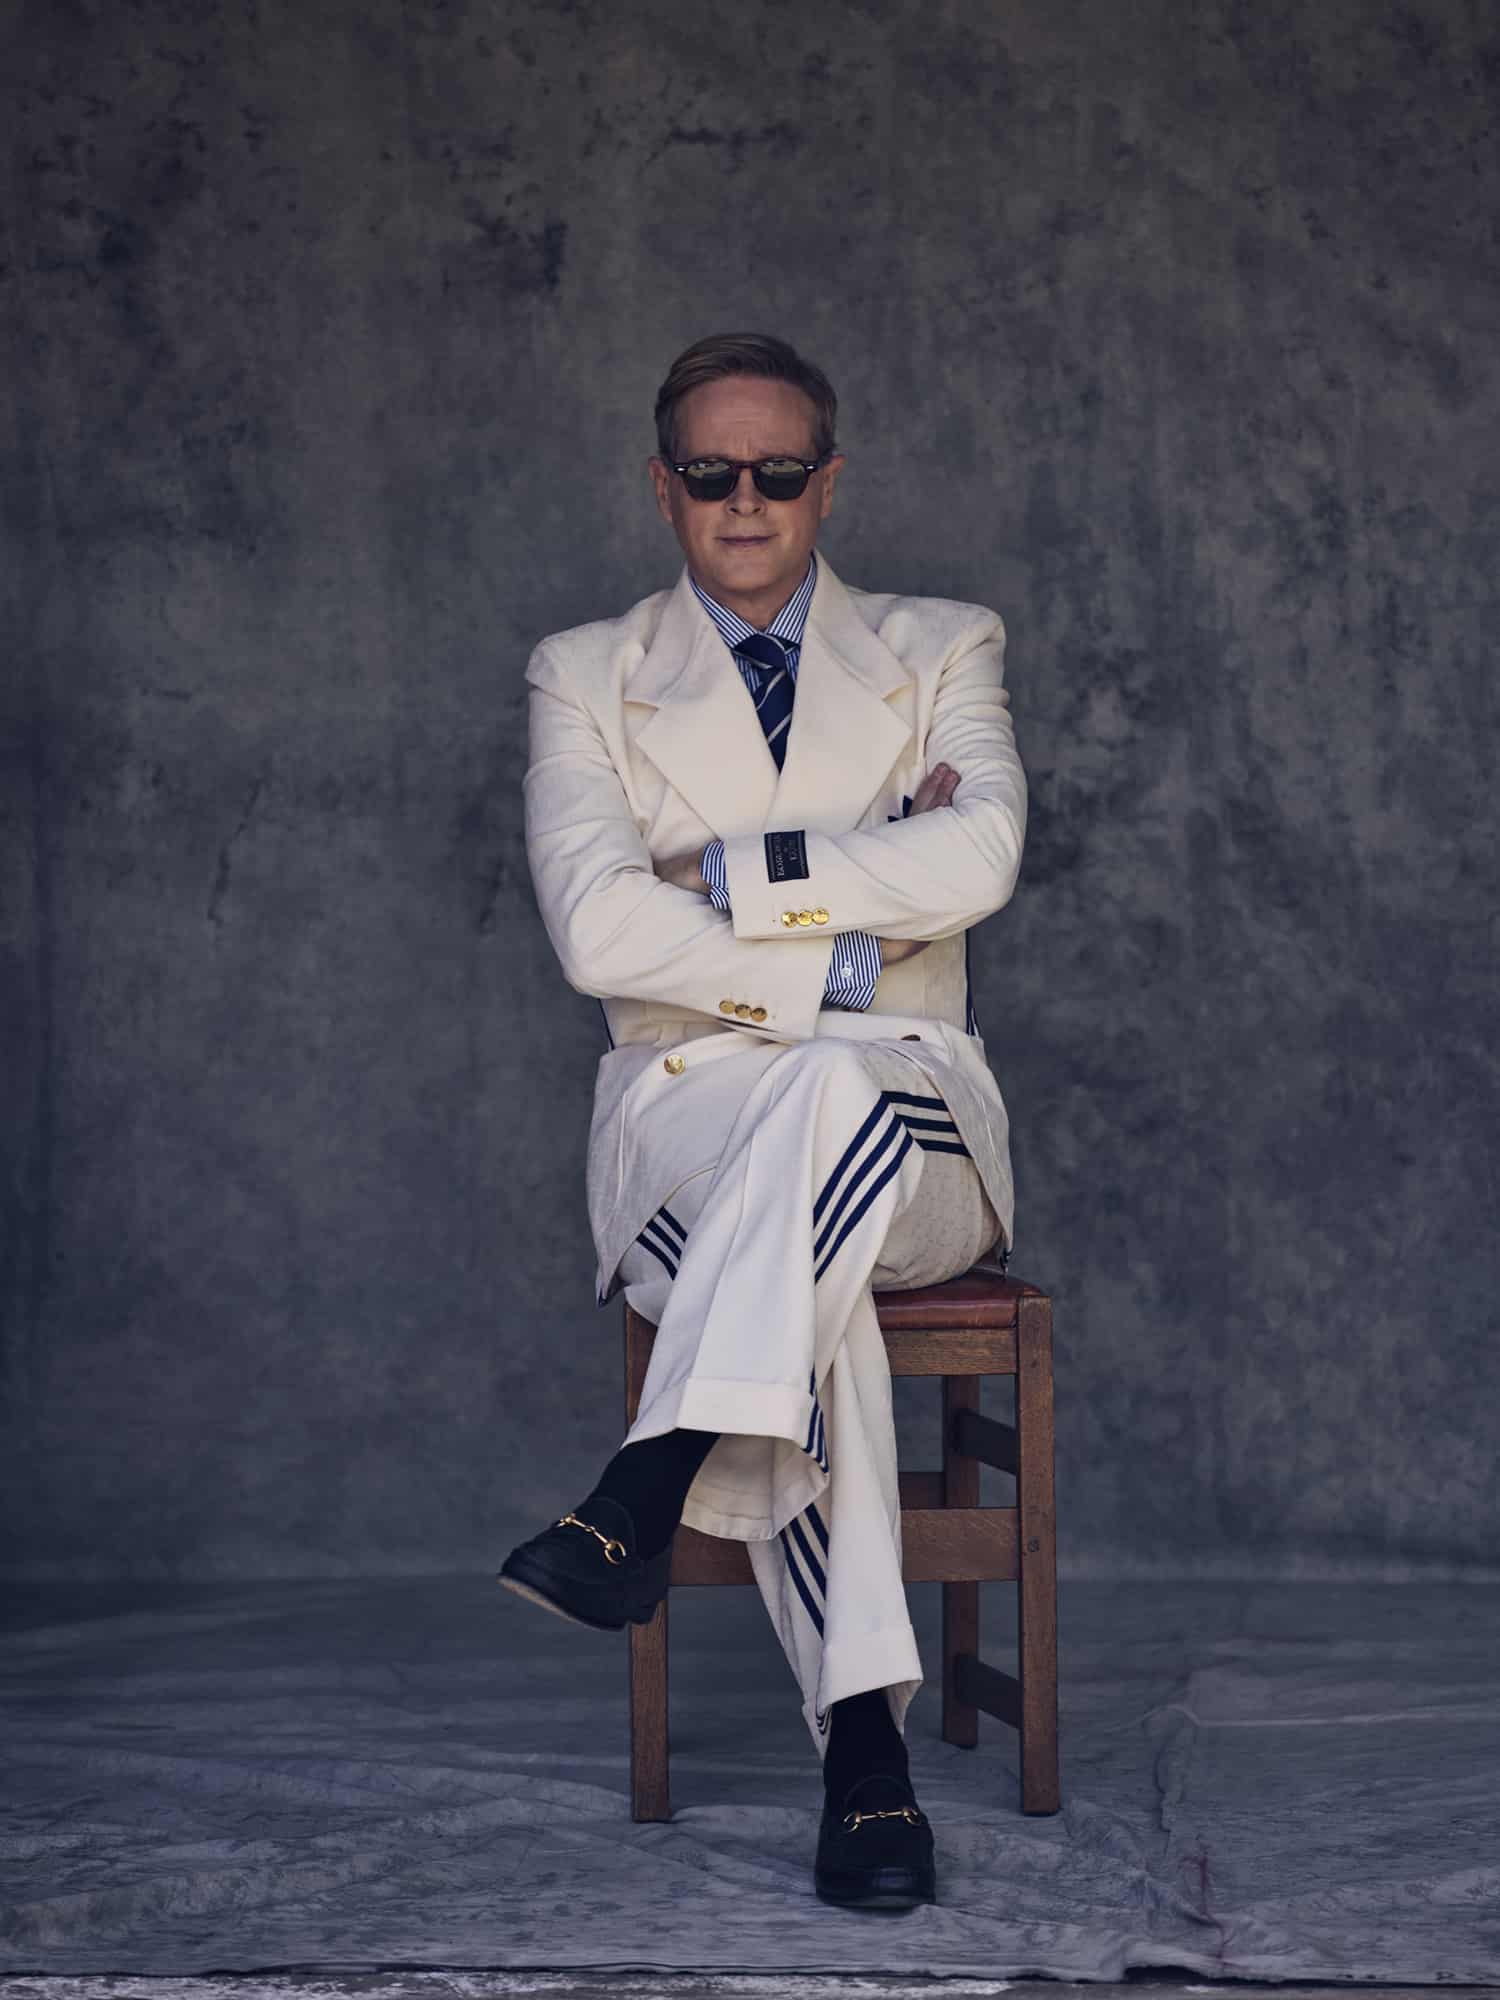 Cary wears ivory monogrammed and Adidas stripe suit, black leather loafers, by GUCCI. Striped shirt and tie by RALPH LAUREN. Sunglasses by JACQUES MARIE MAGE. // 📸 : Kurt Iswarienko